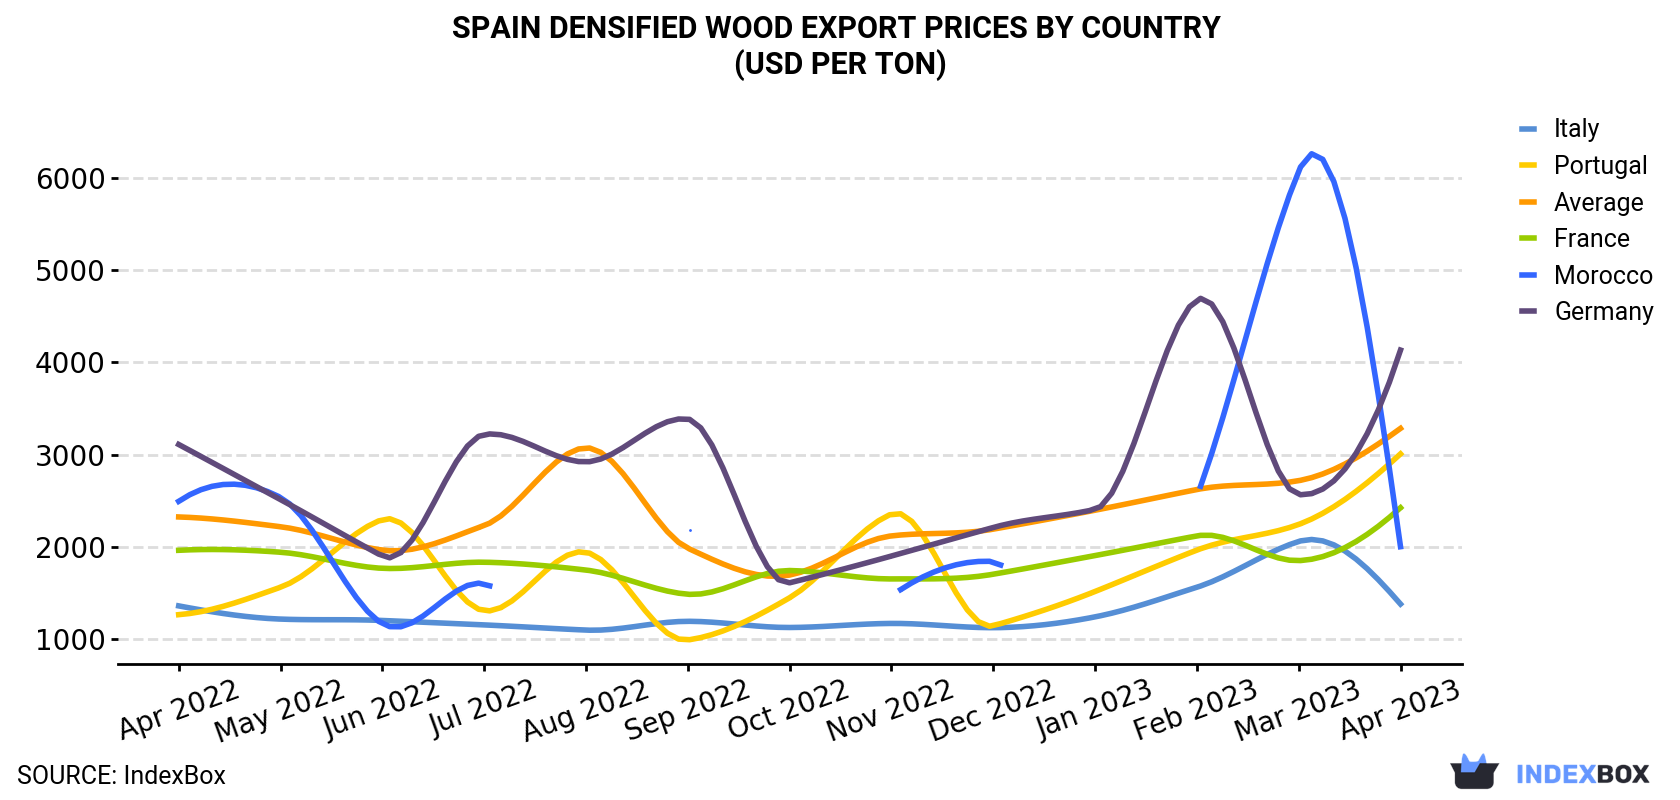 Spain Densified Wood Export Prices By Country (USD Per Ton)